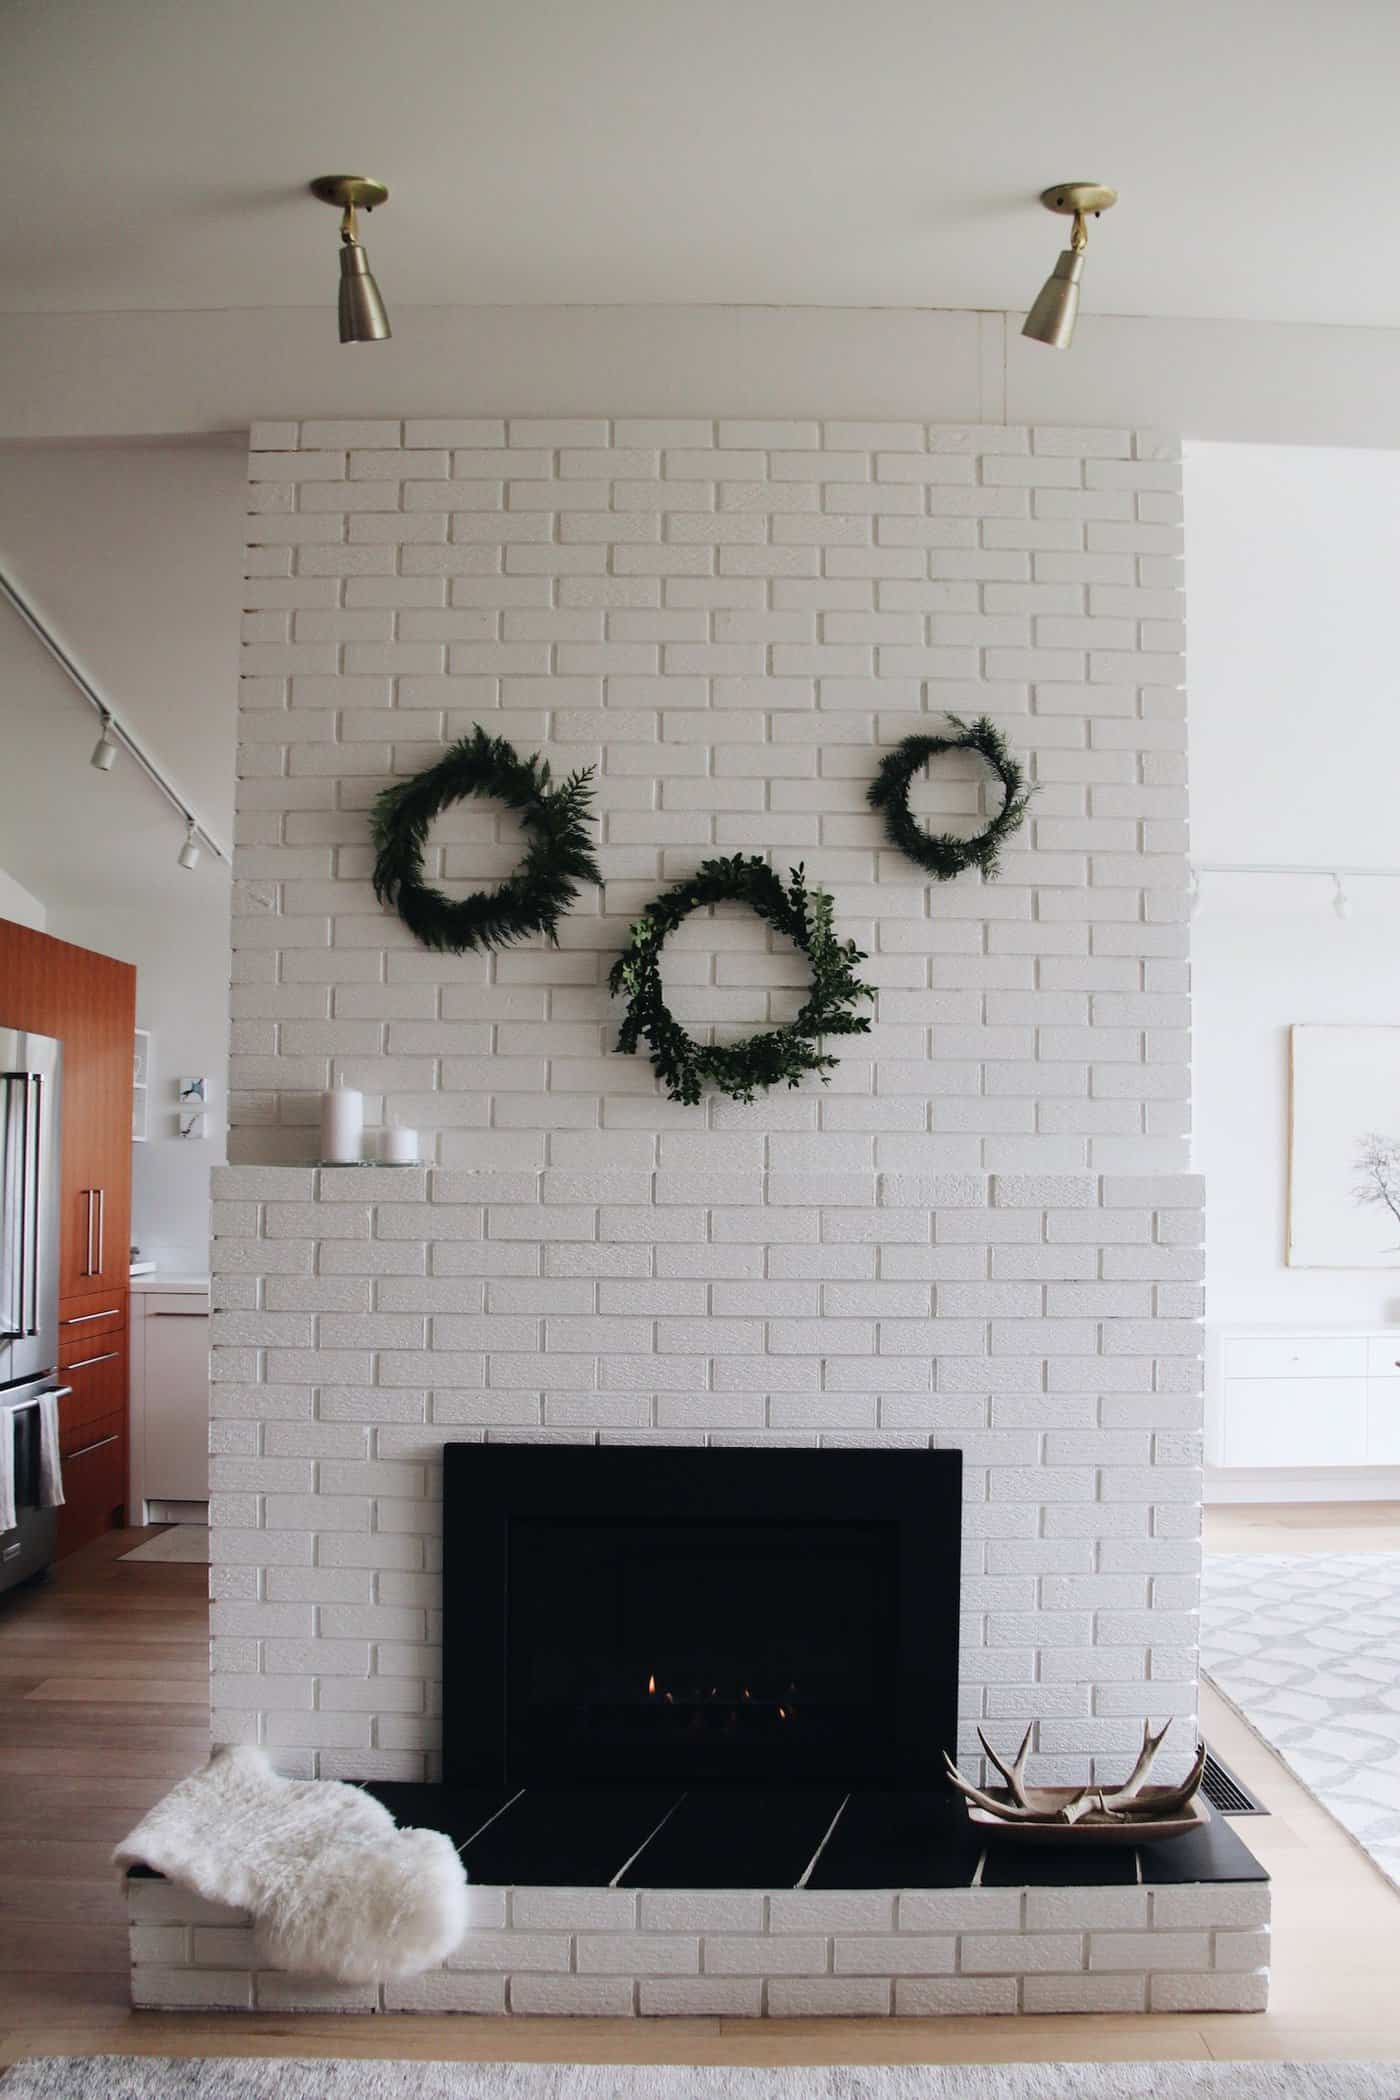 Fresh simple holiday wreaths on modern mantle | home for the harvest